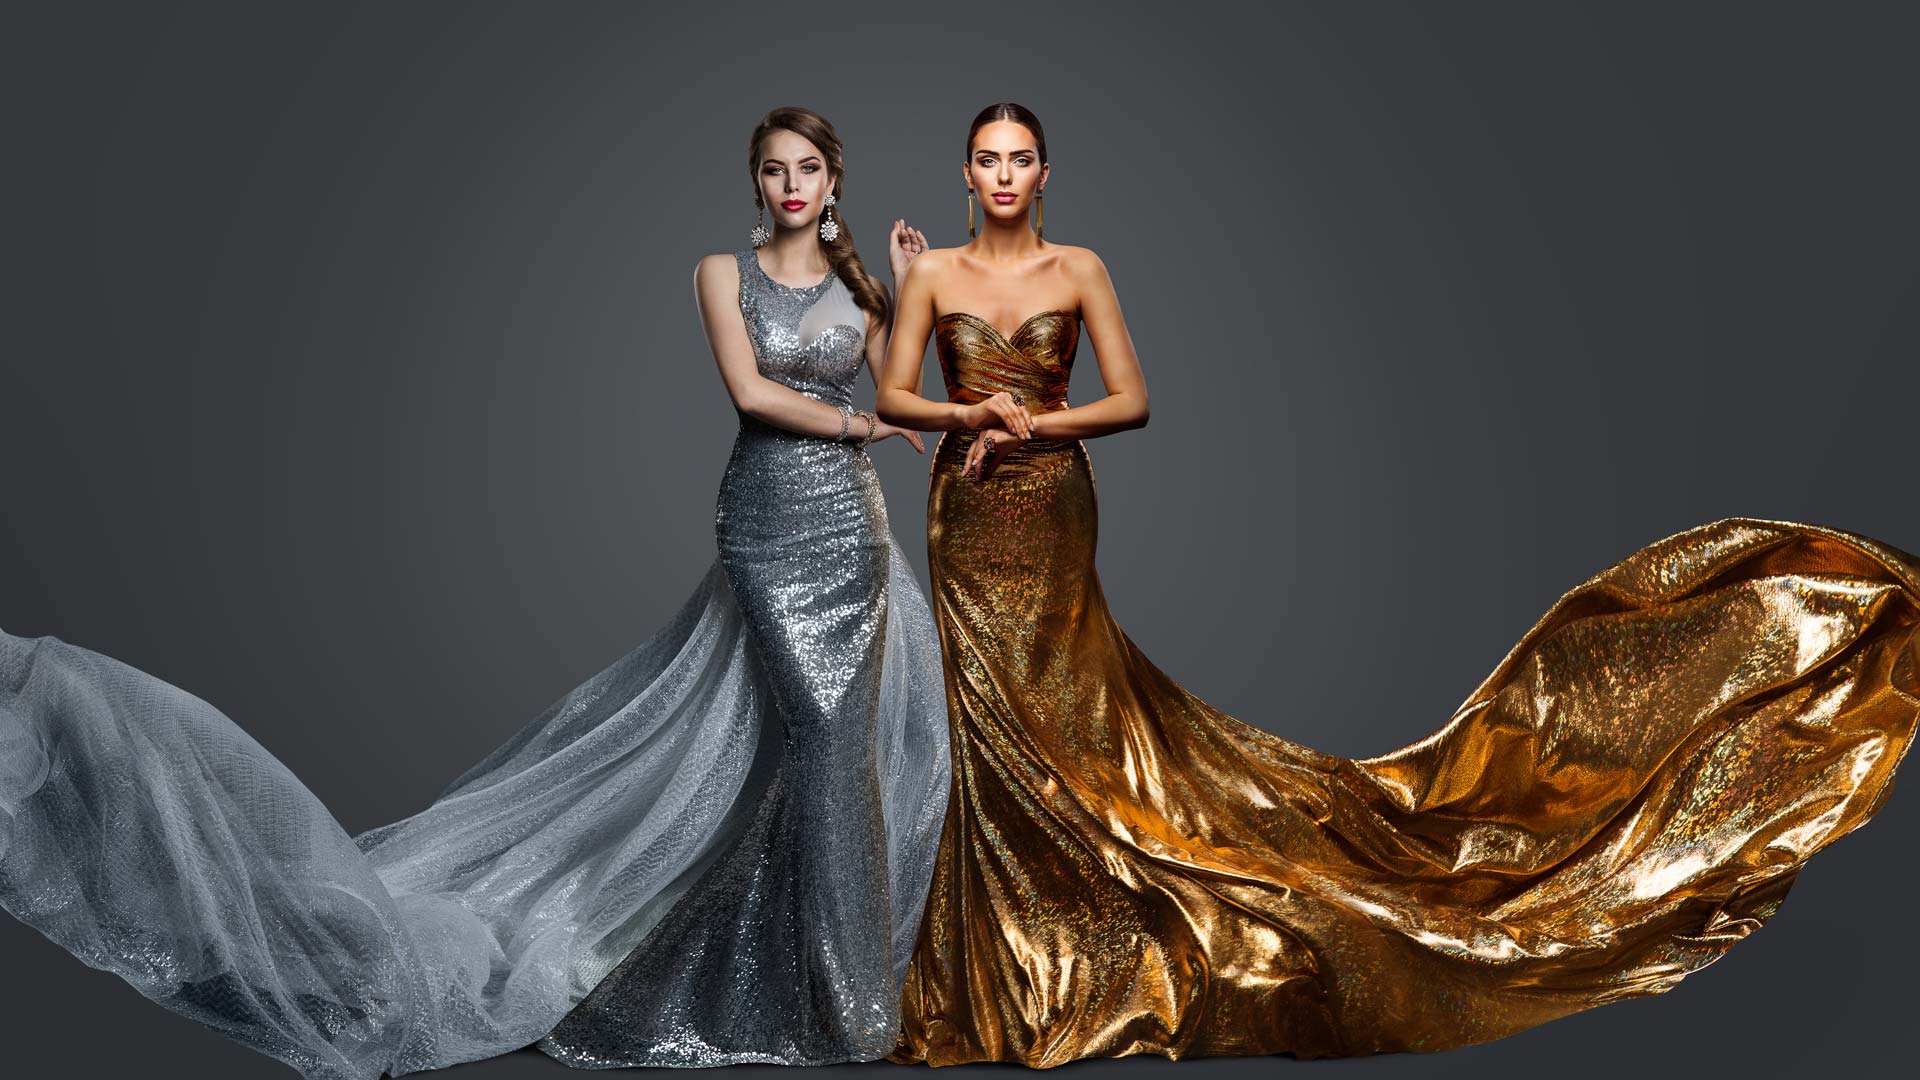 Fashionable two Woman in Golden Evening Dress and Silver Gown. Glamour Beauty Model Fashion Prom Clothes with Train. Studio